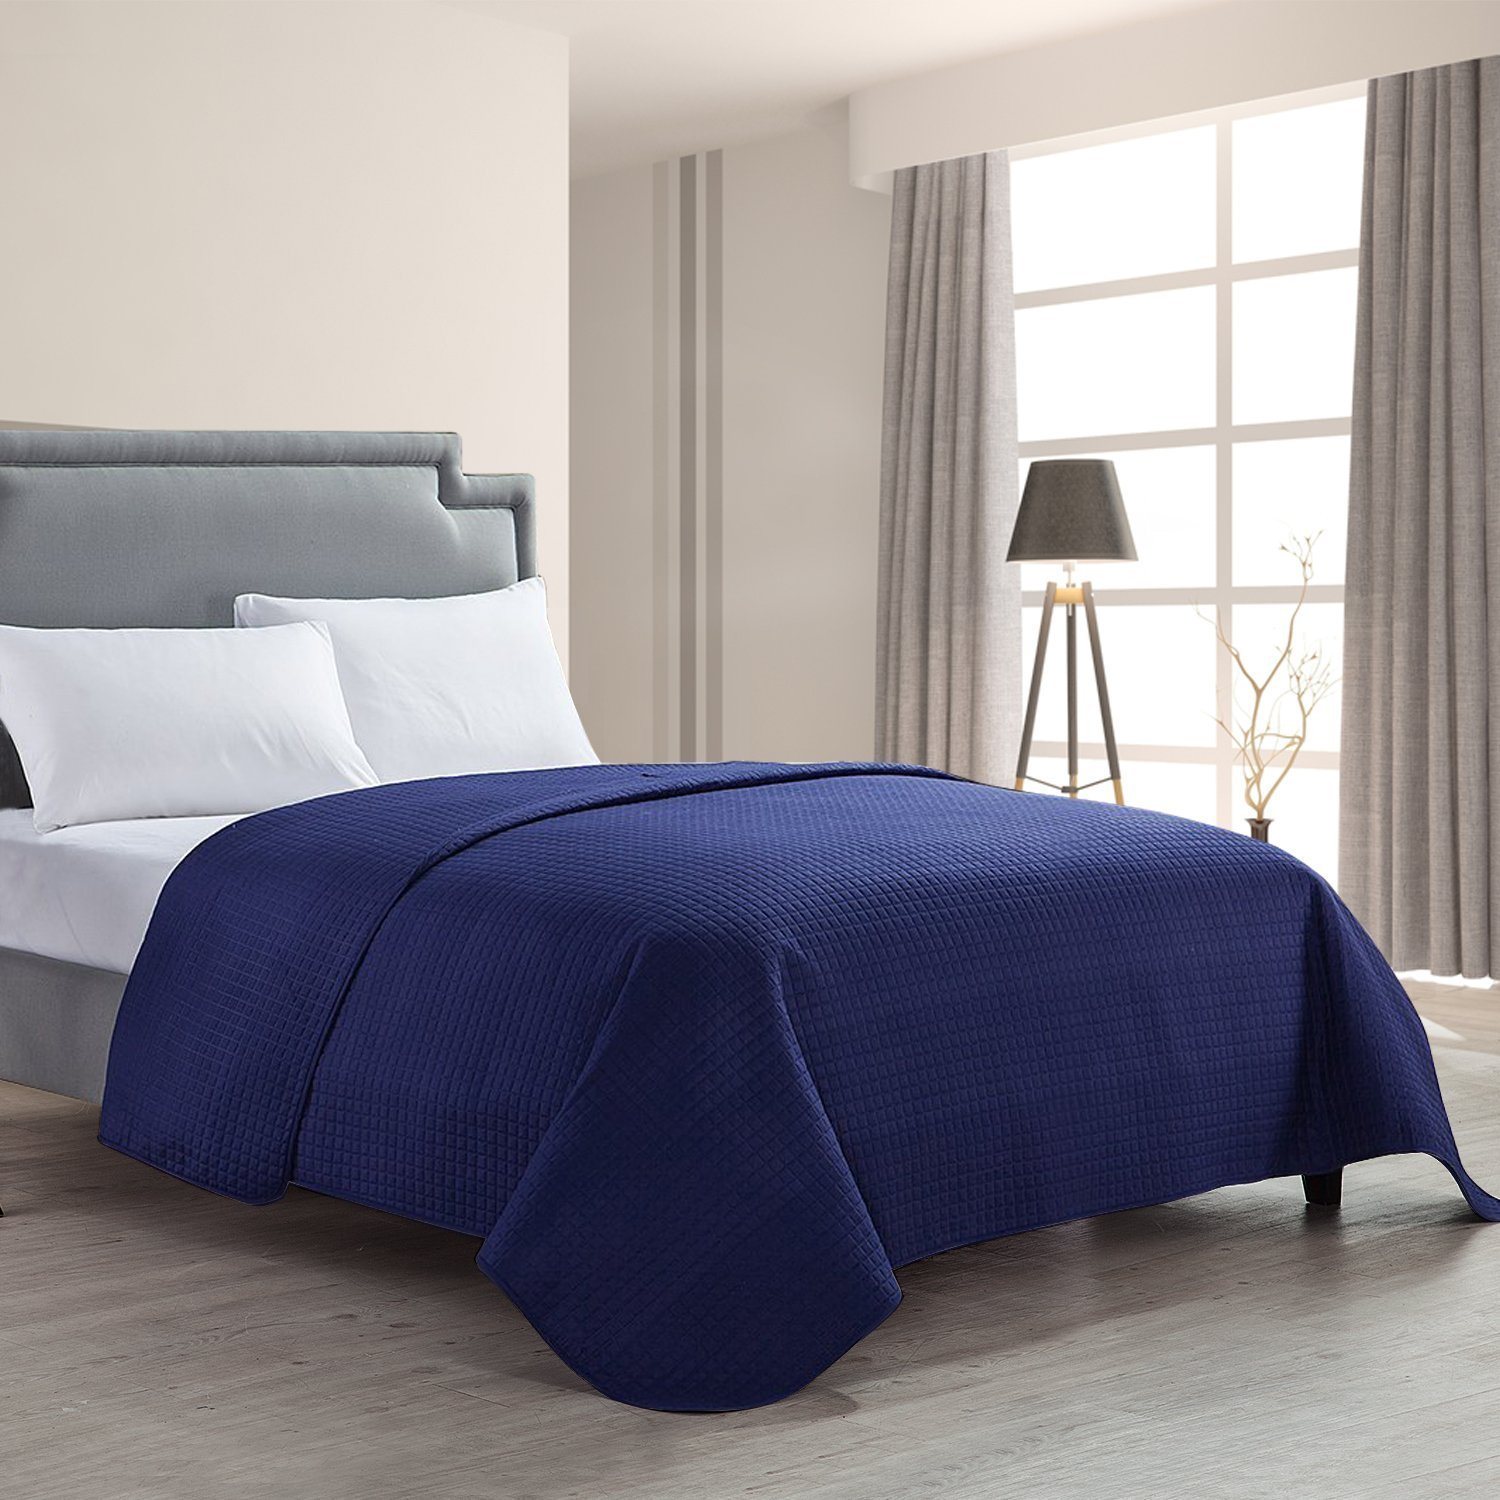 Promotional Quilted Coverlet for Home Bedding Set